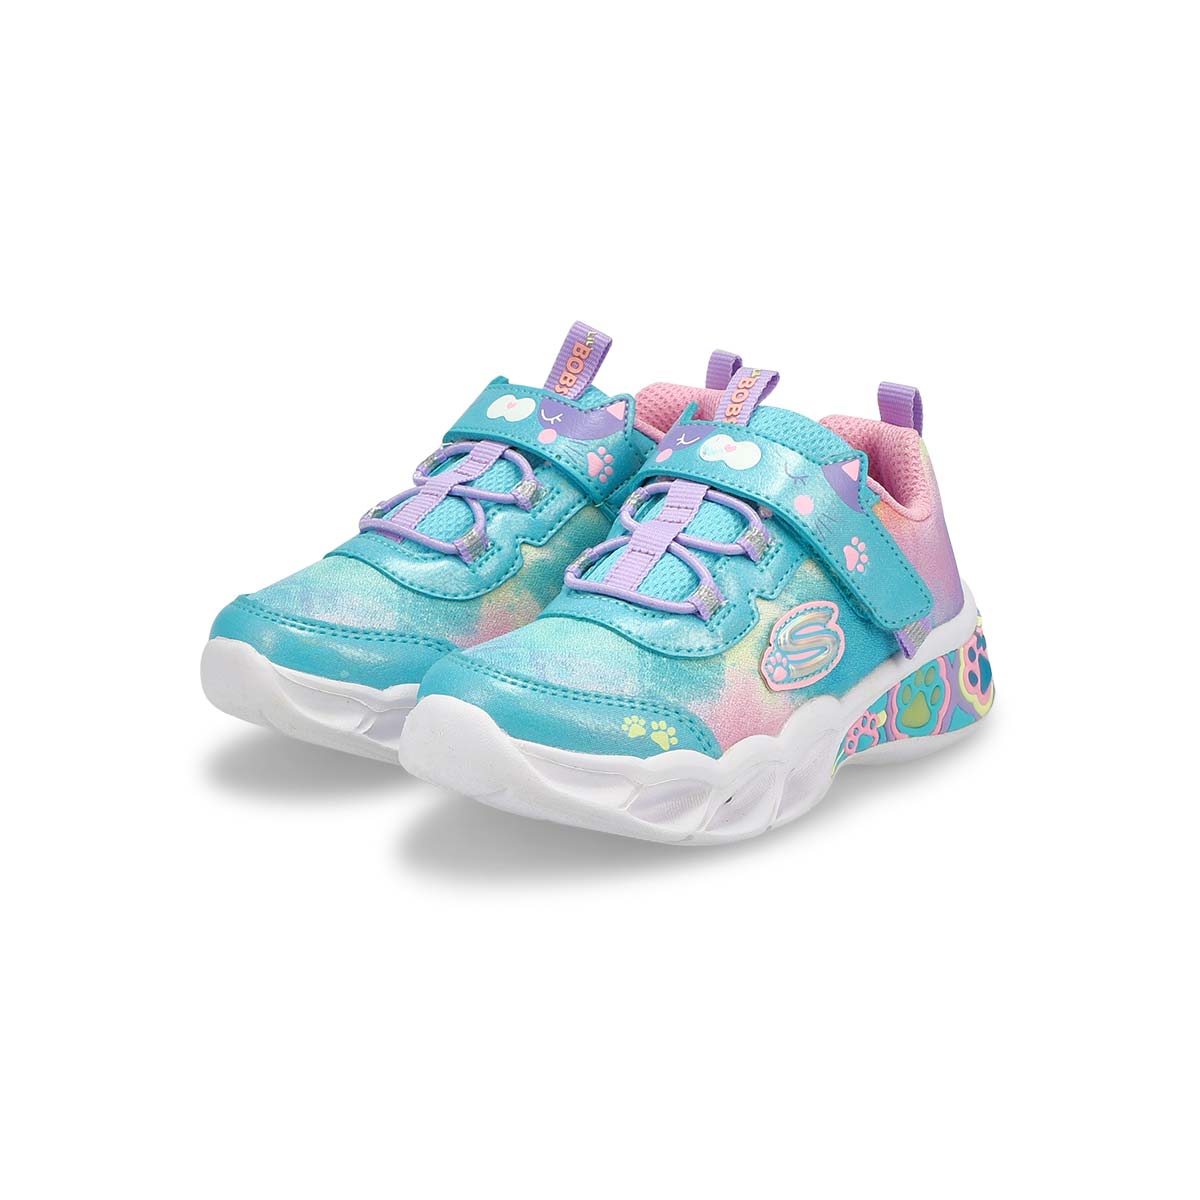 Infants' Pretty Paws Sneaker - Turquoise/Multi